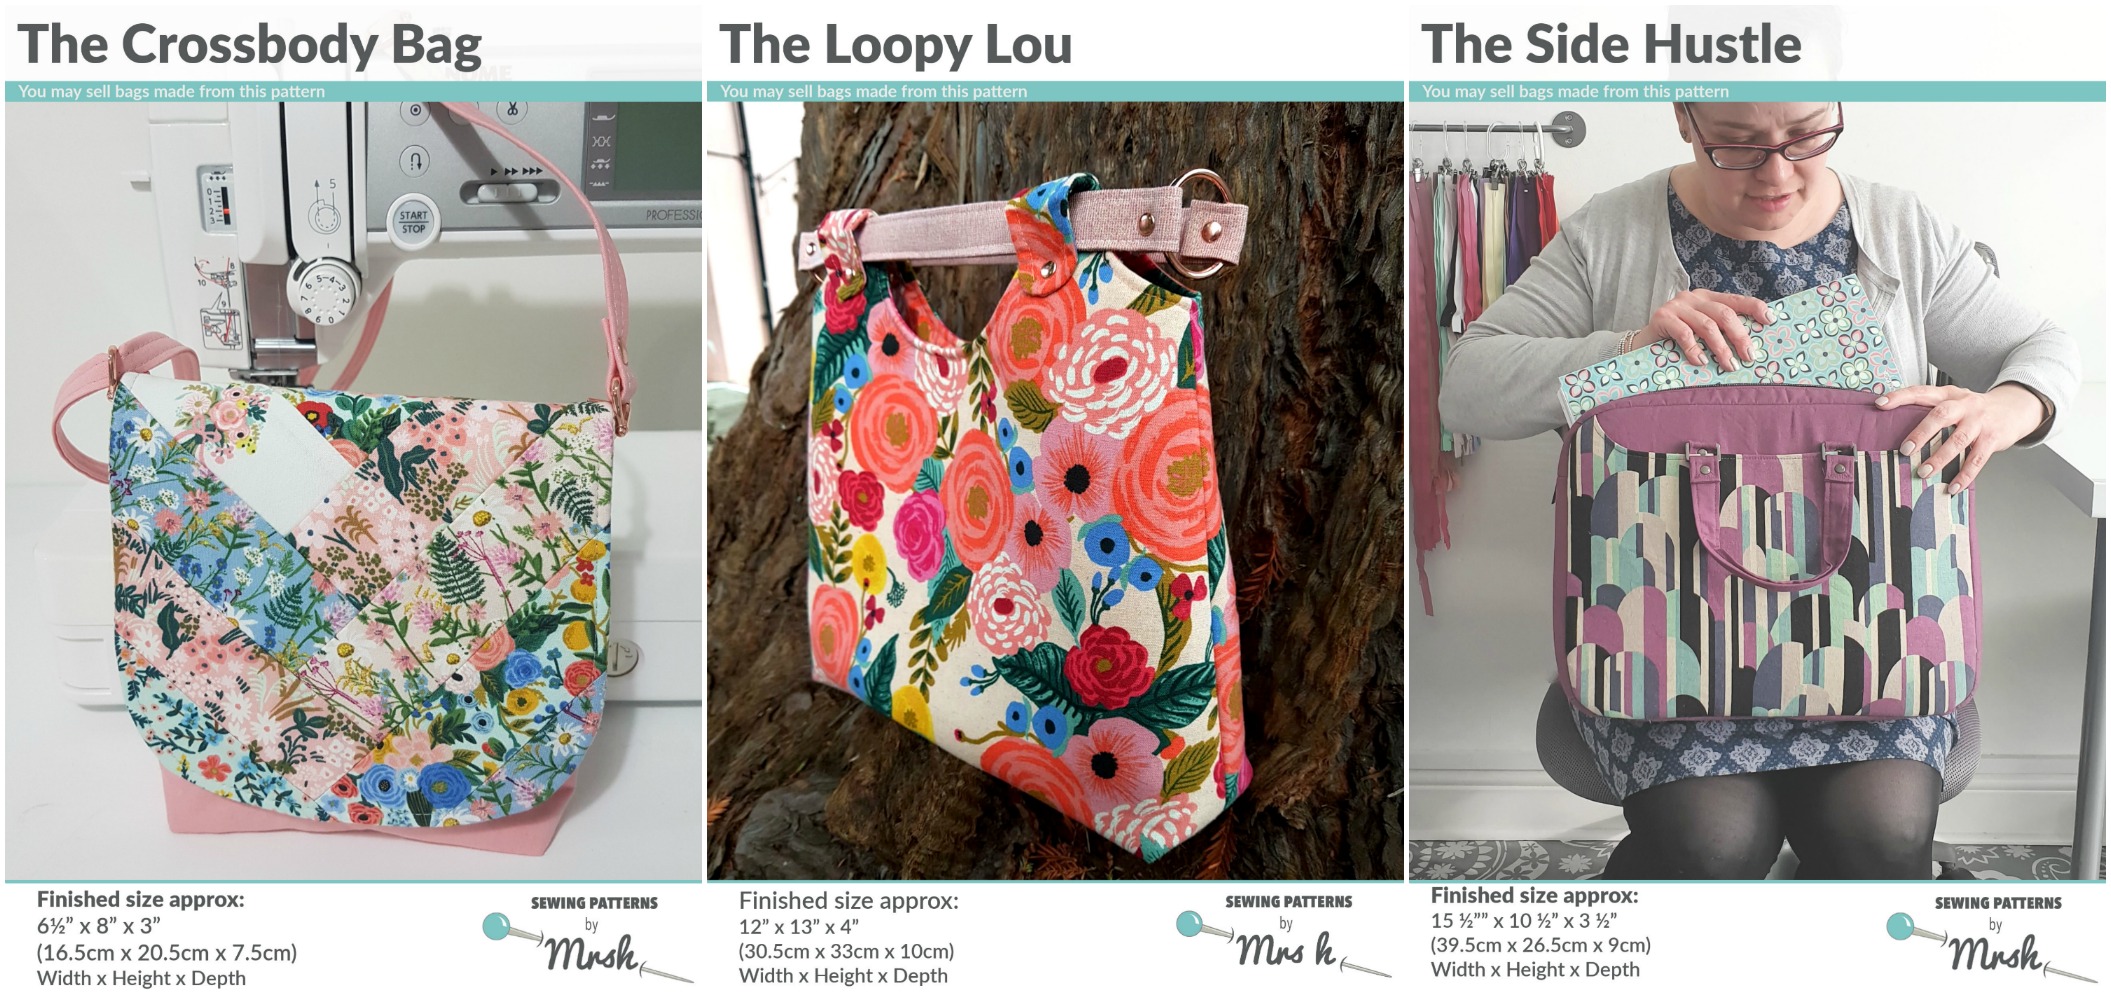 The Crossbody Bag, The Loopy Lou, and The Side Hustle